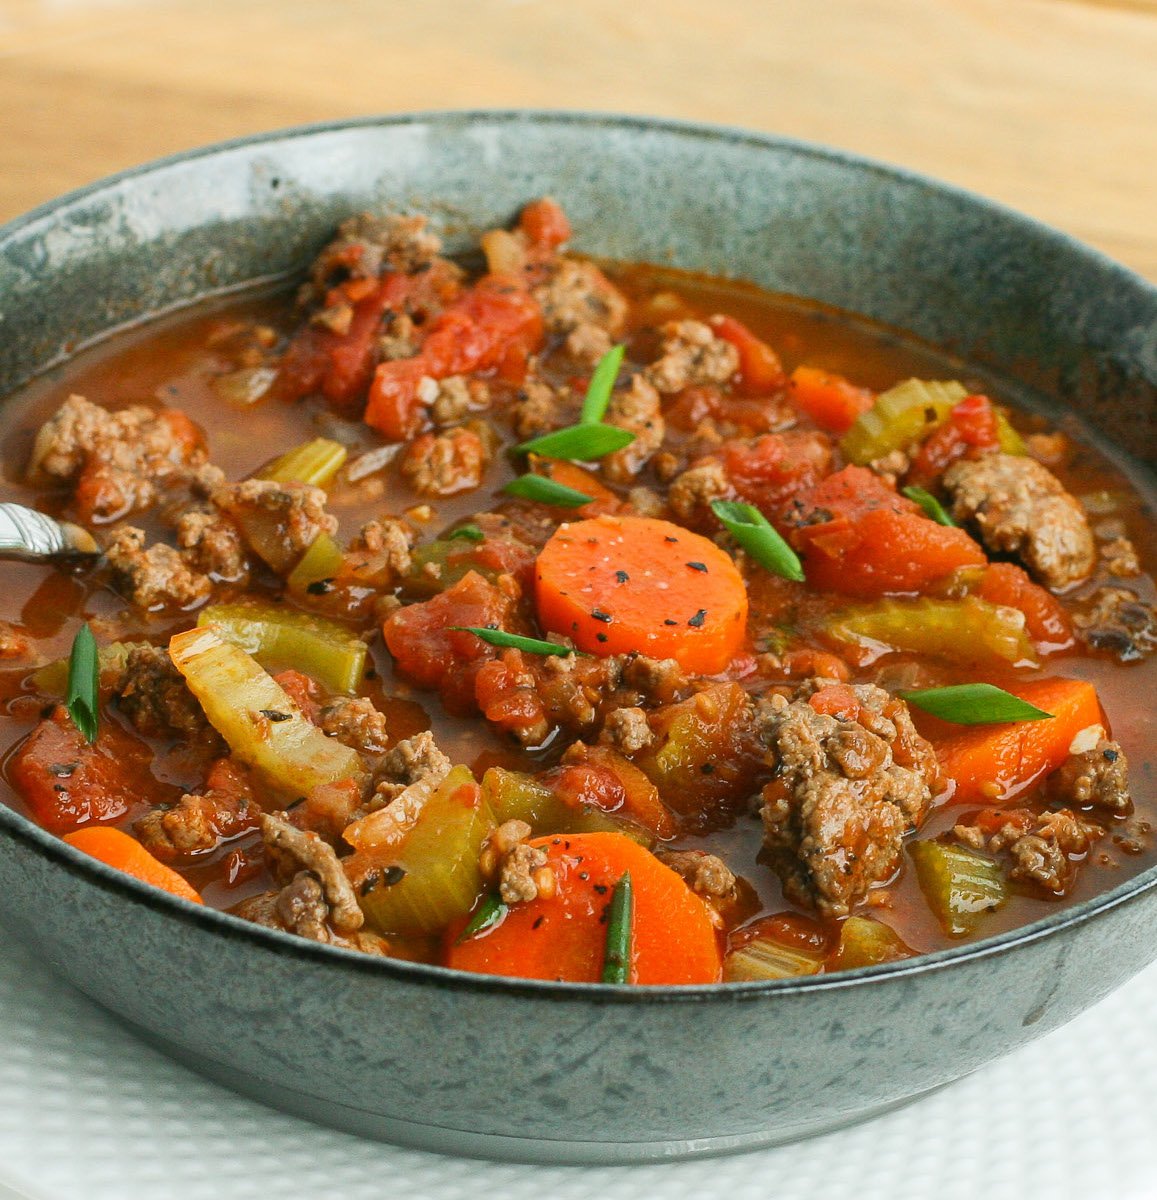 Green bowl filled with soup made with chunks of ground beef, carrots, tomatoes and celery.